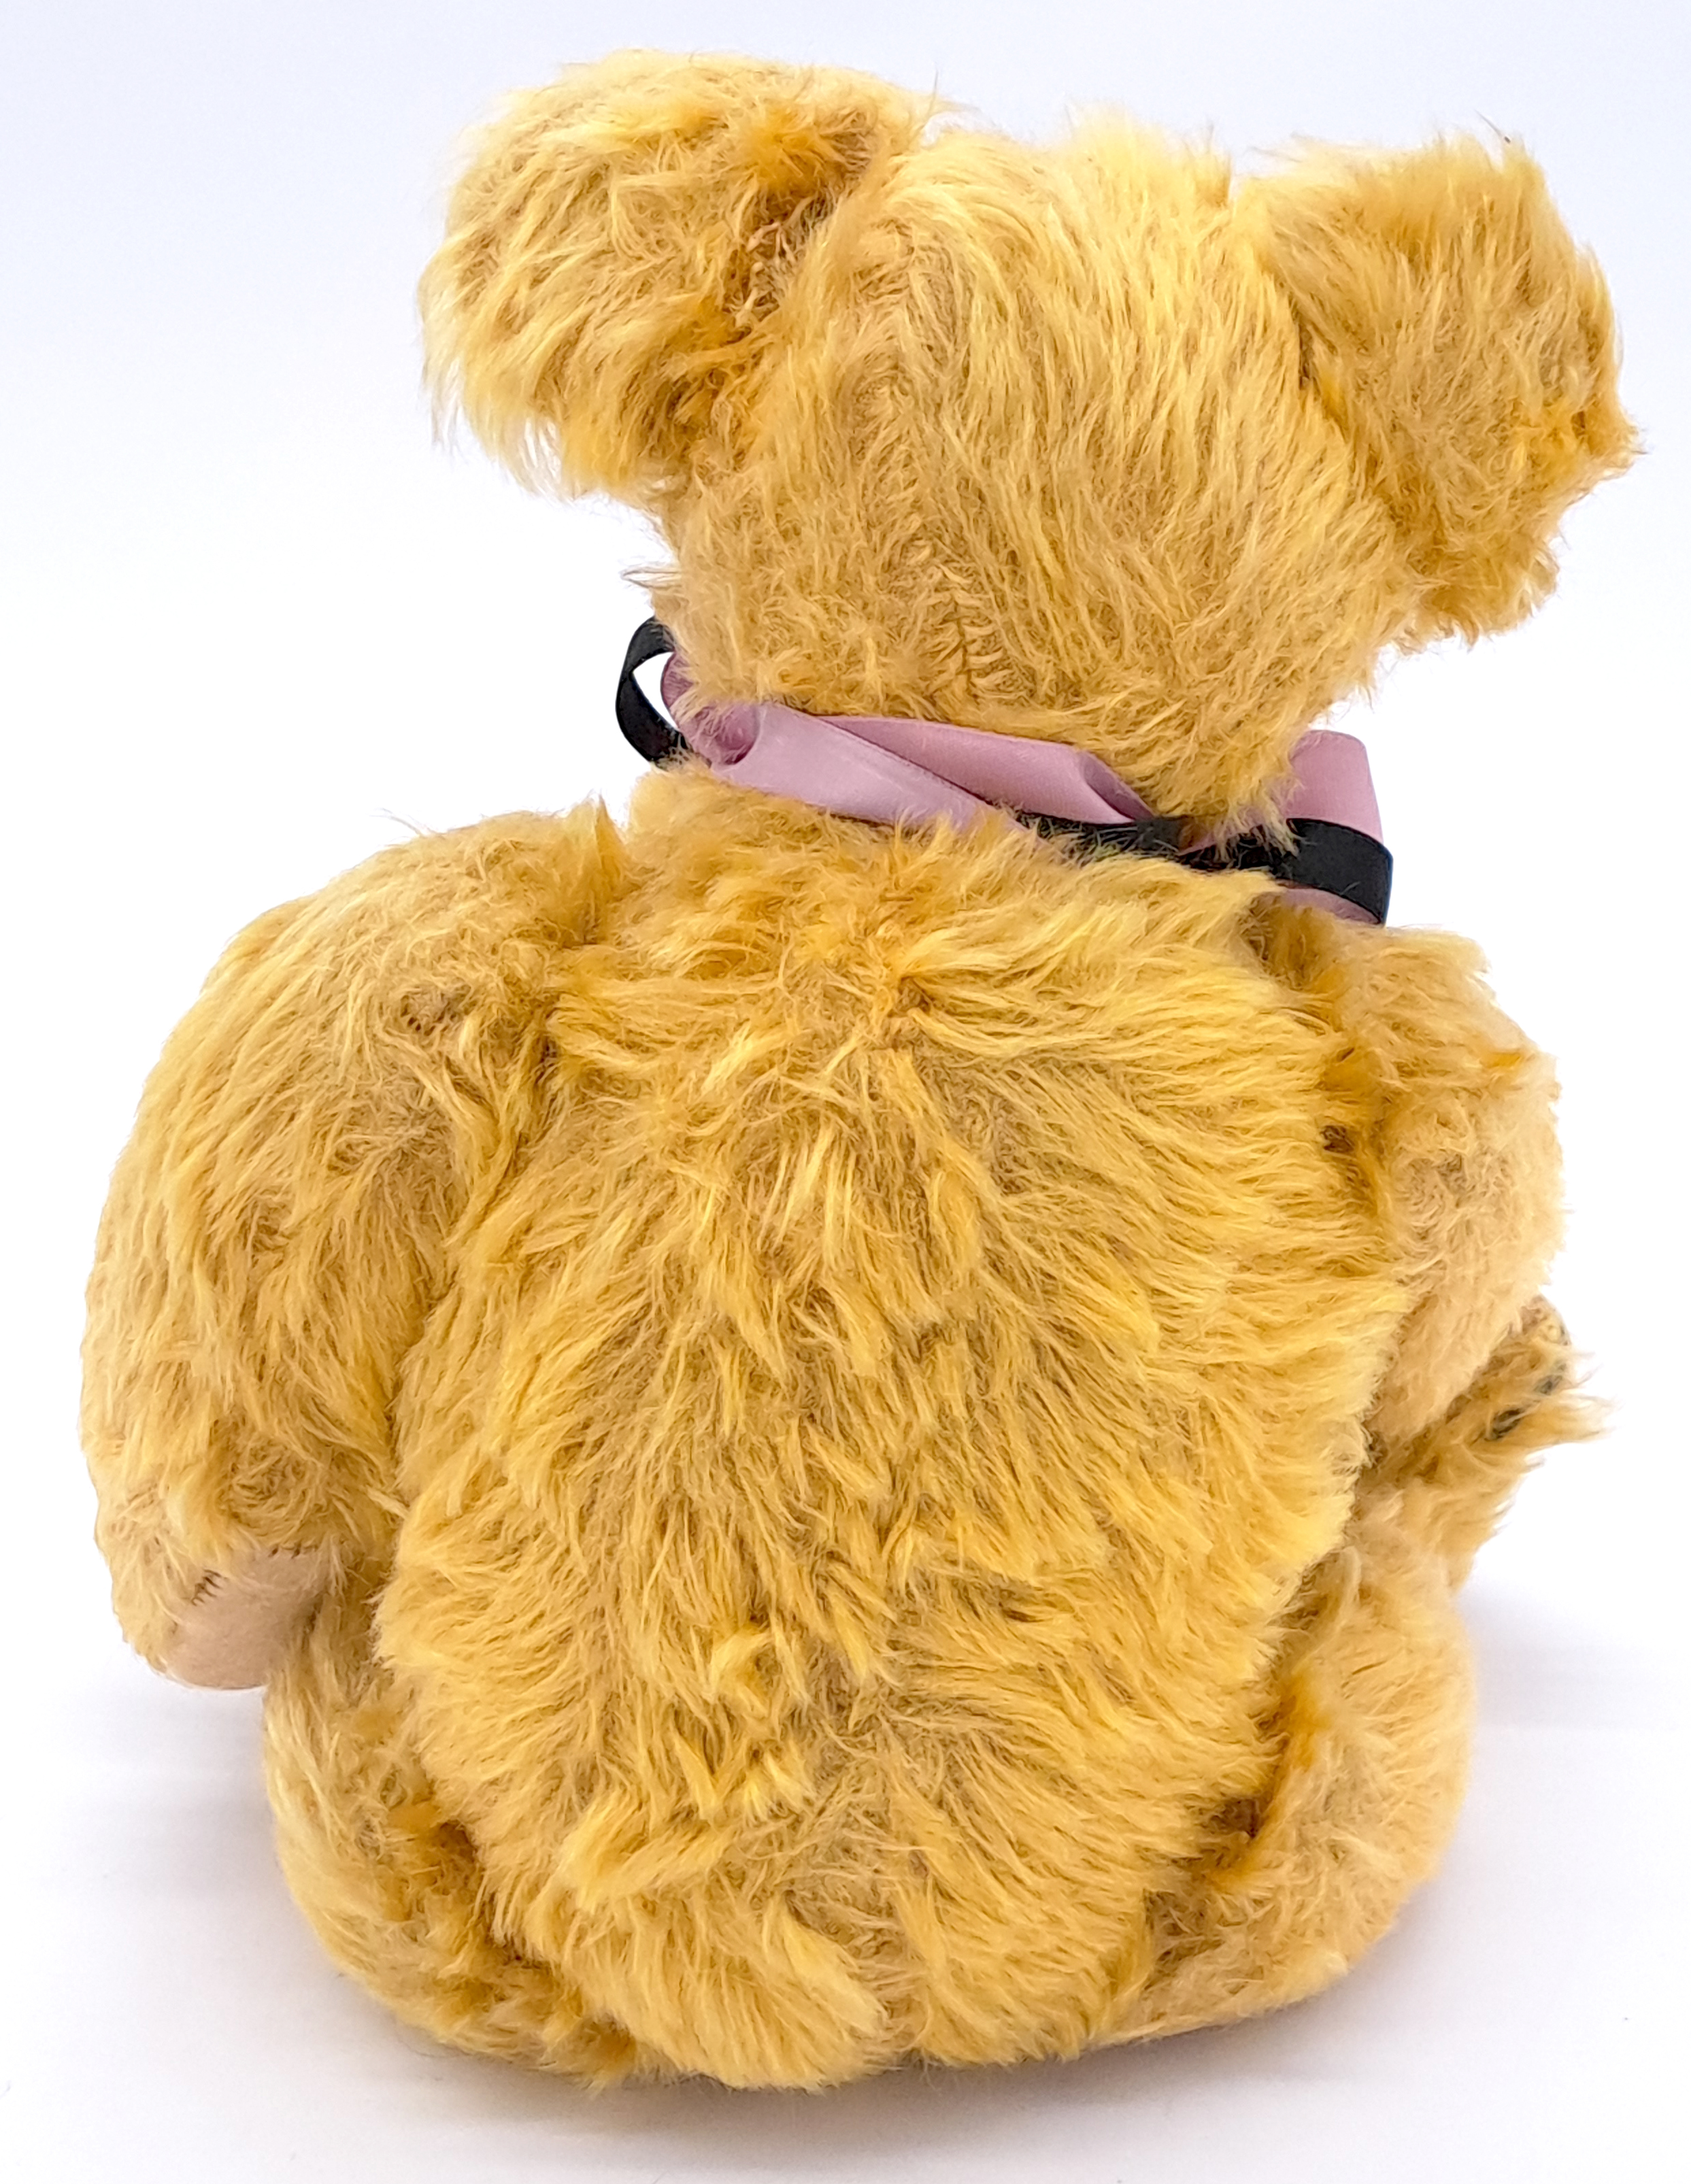 National French and Novelty Co rare antique teddy bear - Image 2 of 2